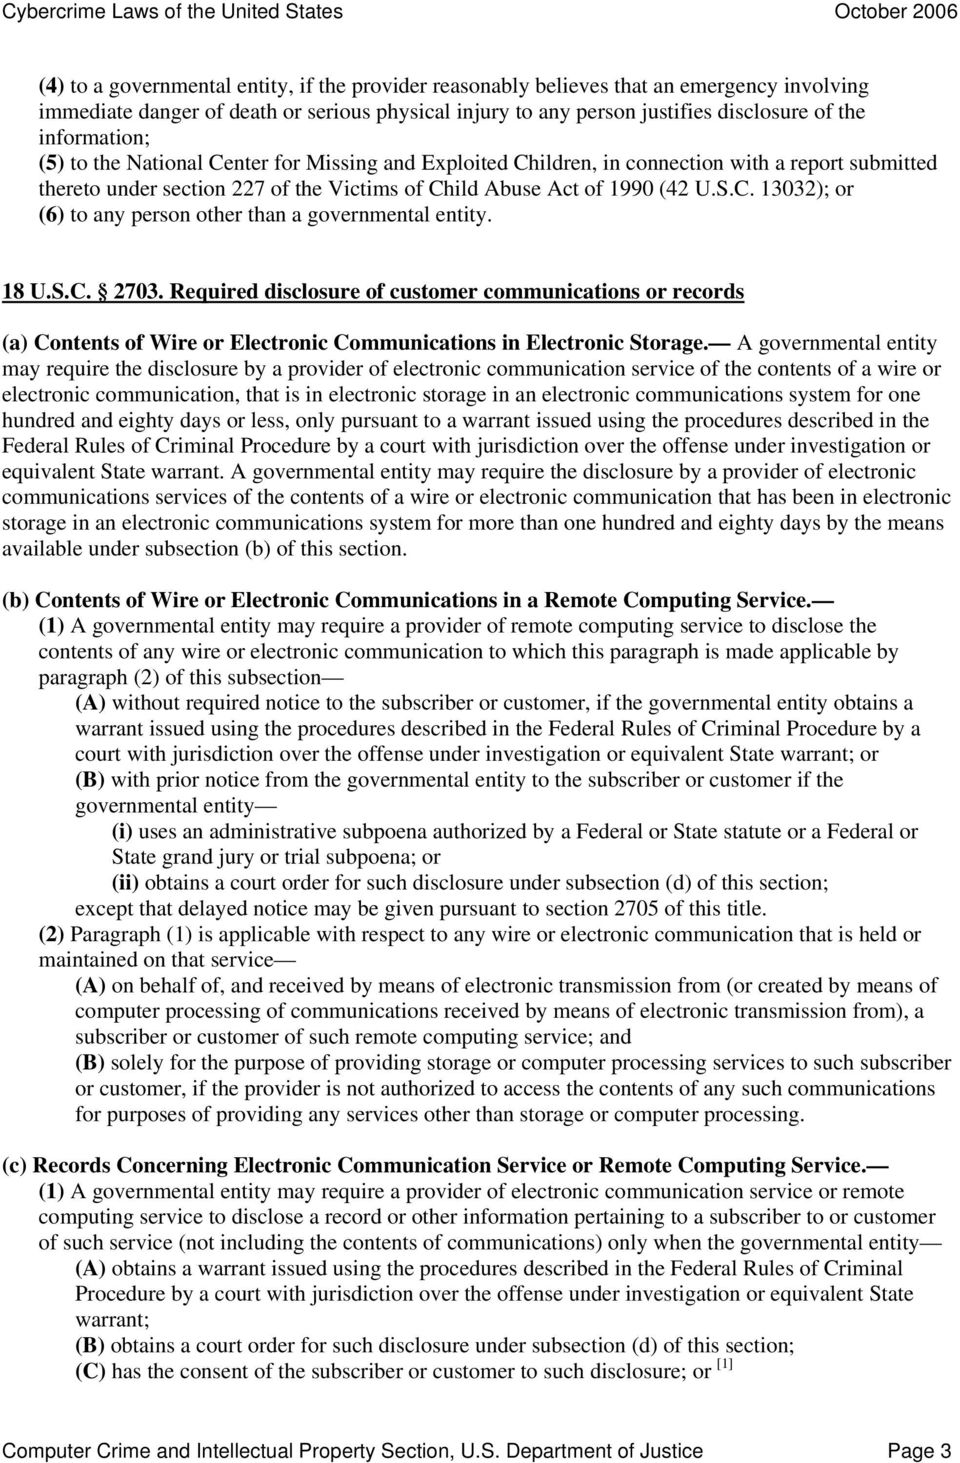 18 U.S.C. 2703. Required disclosure of customer communications or records (a) Contents of Wire or Electronic Communications in Electronic Storage.